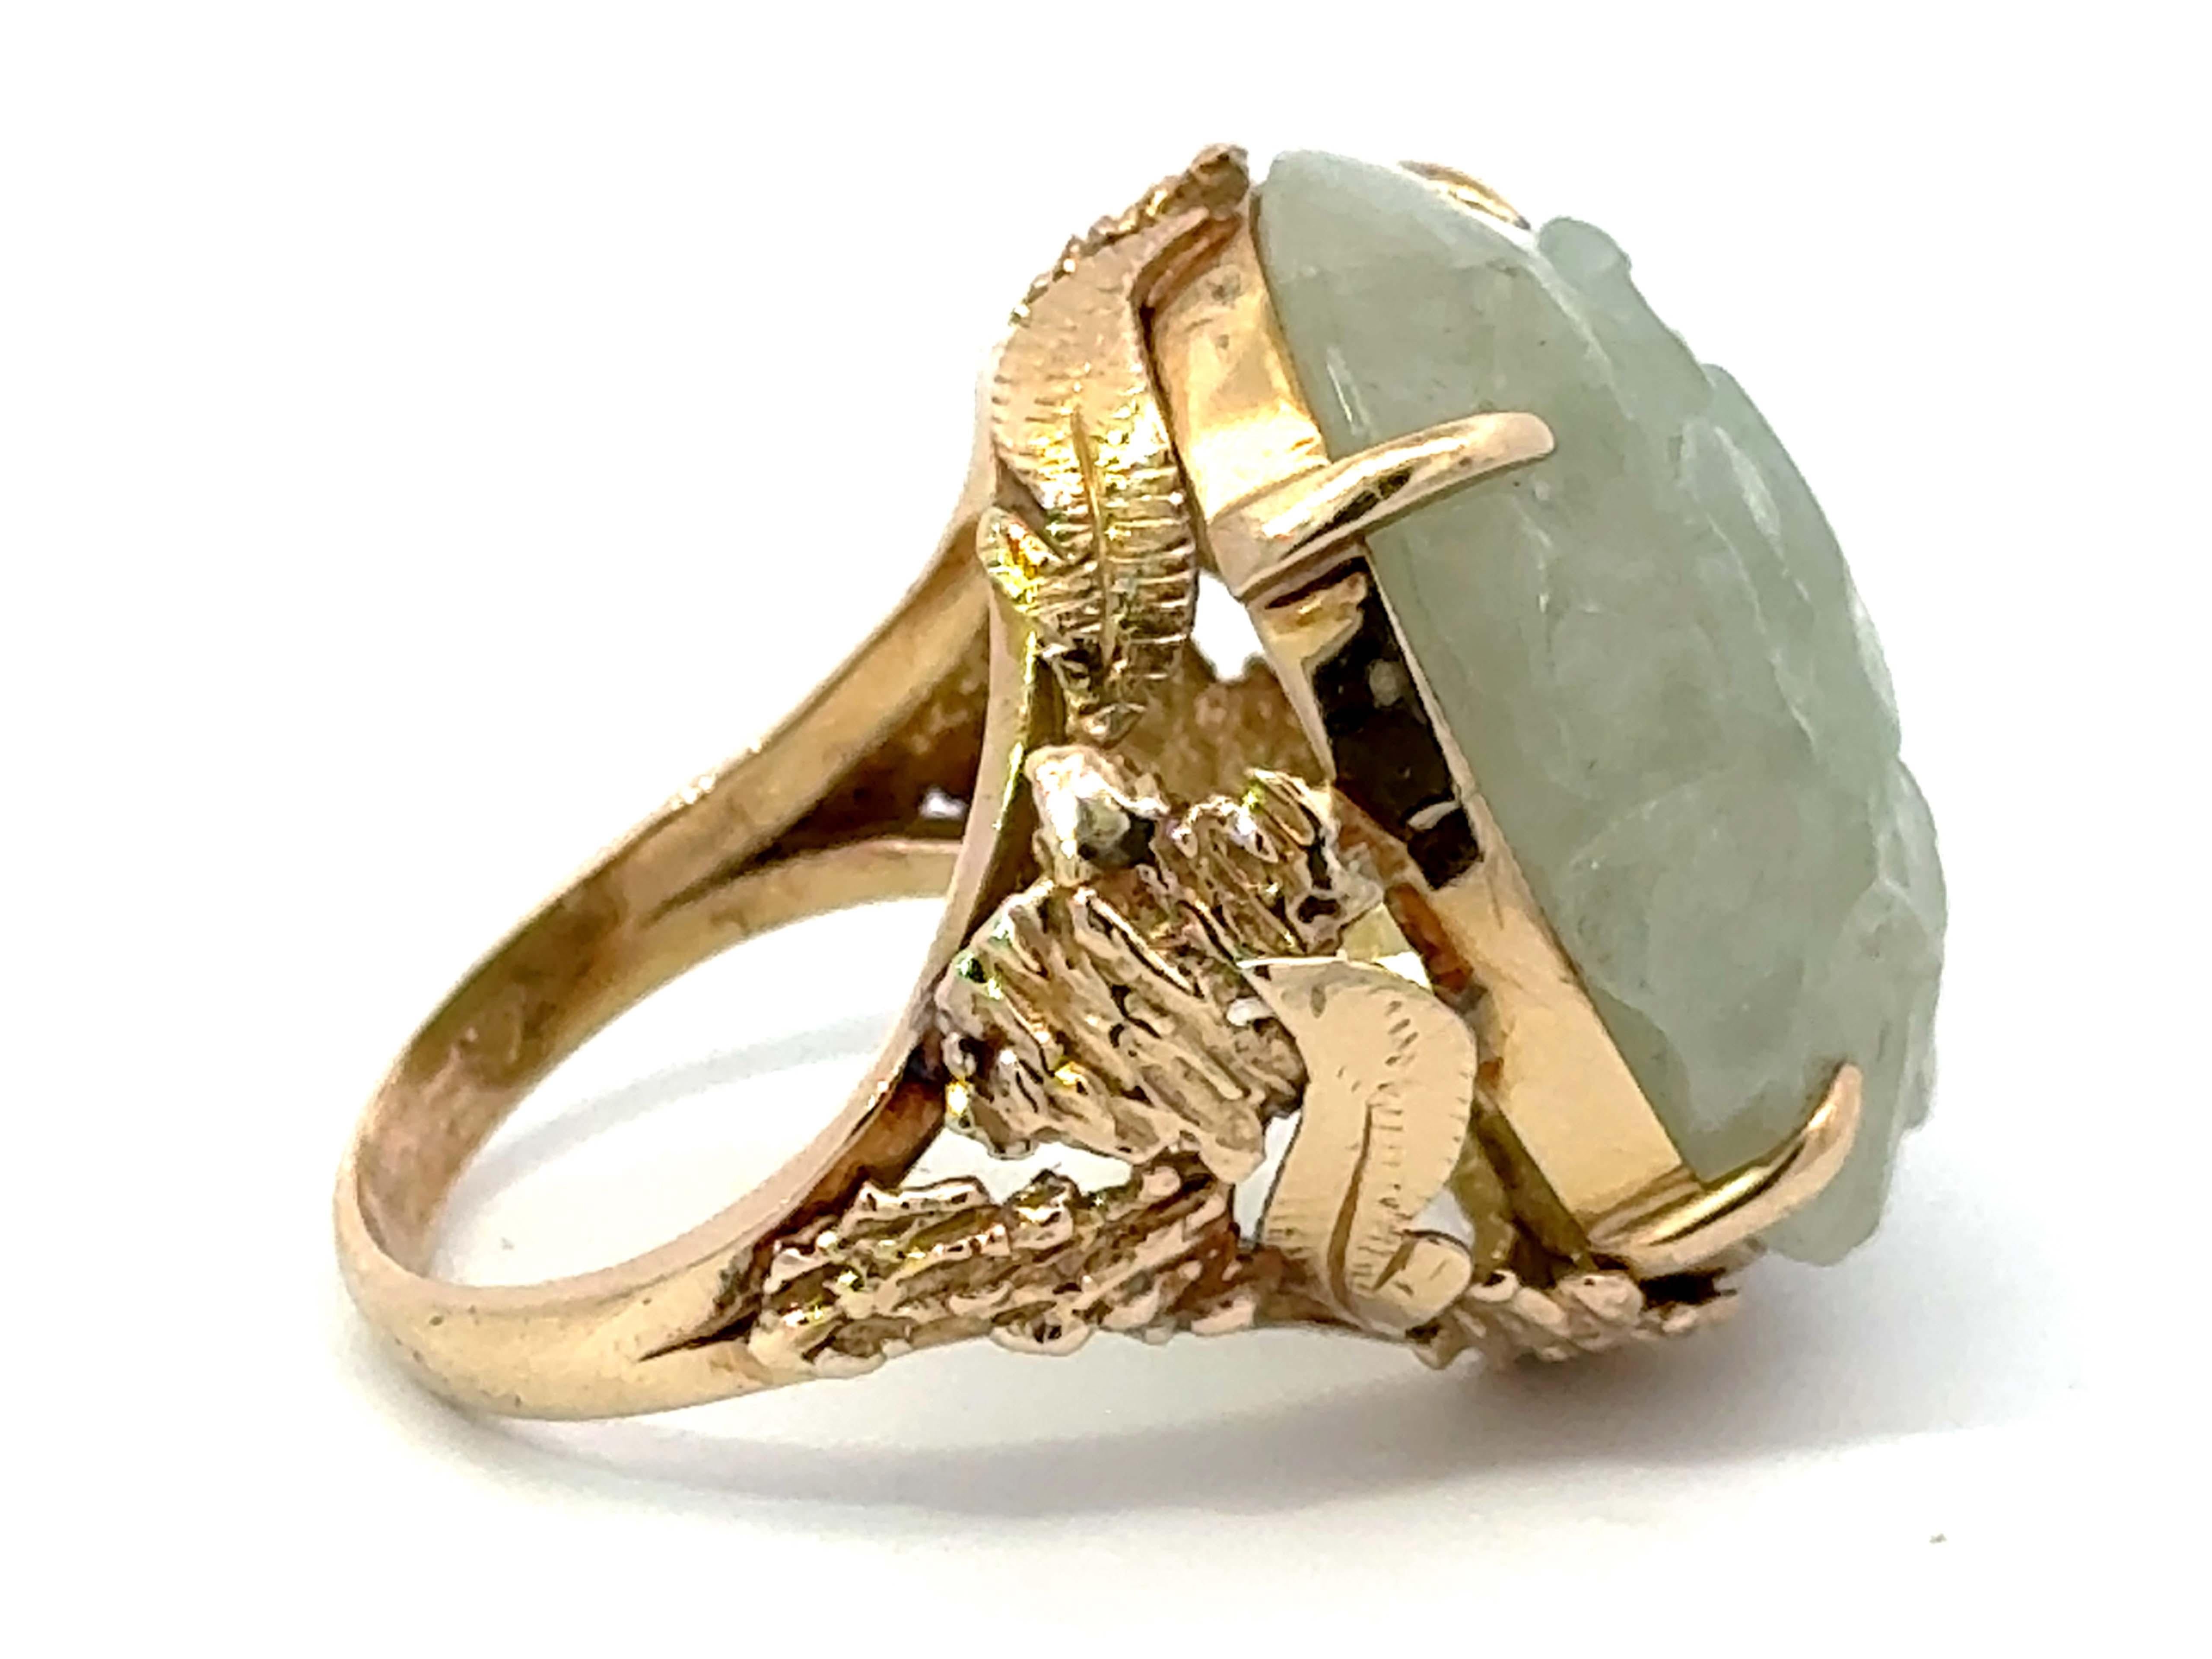 Carved Nephrite Jade Ring 14K Yellow Gold In Excellent Condition For Sale In Honolulu, HI